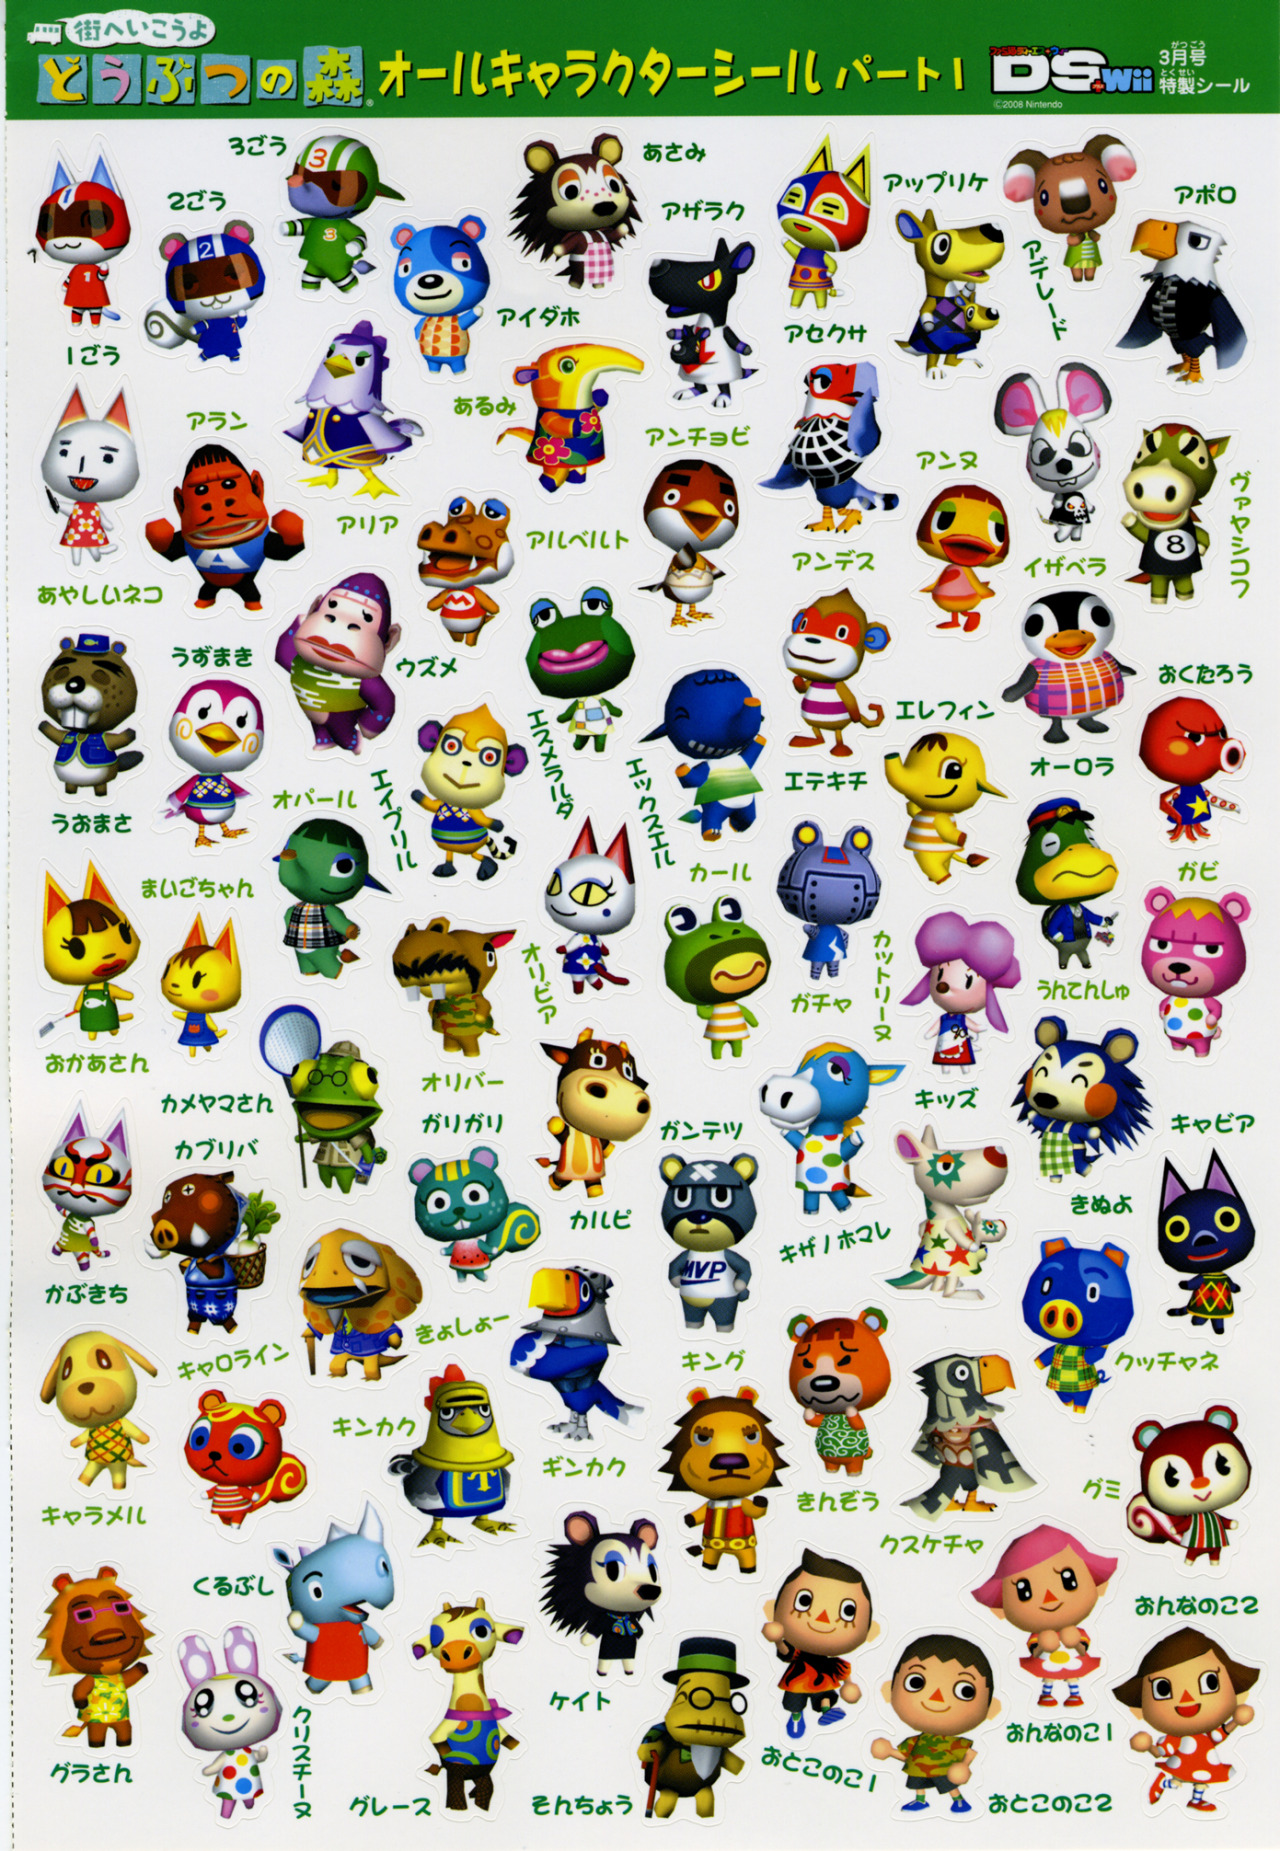 animal crossing city folk guide and cheats